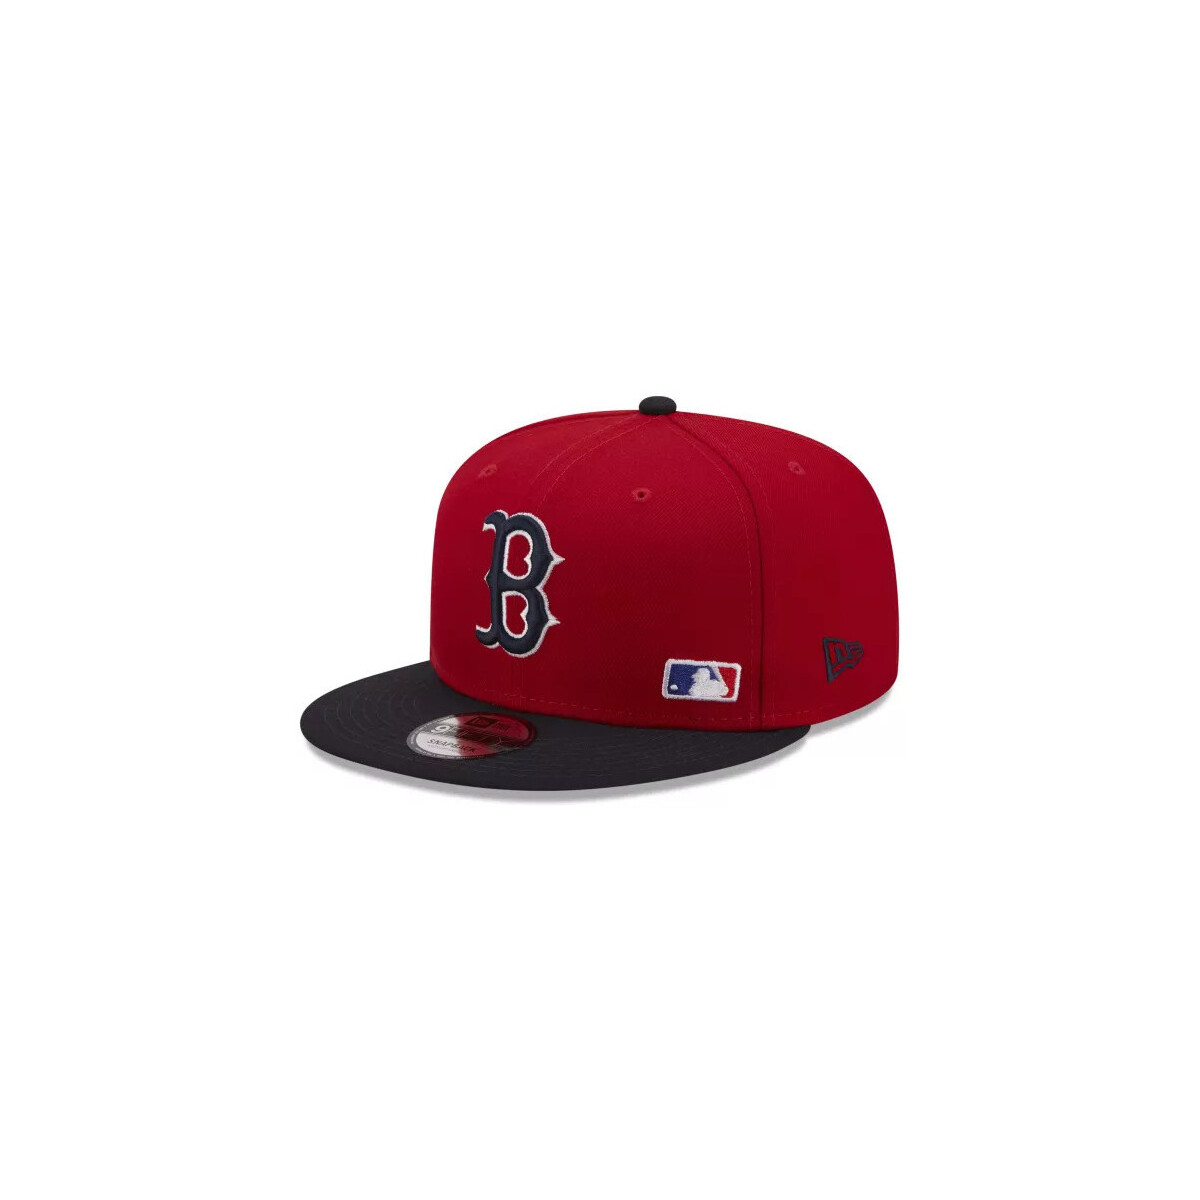 Accessoires textile Casquettes New-Era TEAM ARCH 9FIFTY BOSTON RED OTC Rouge